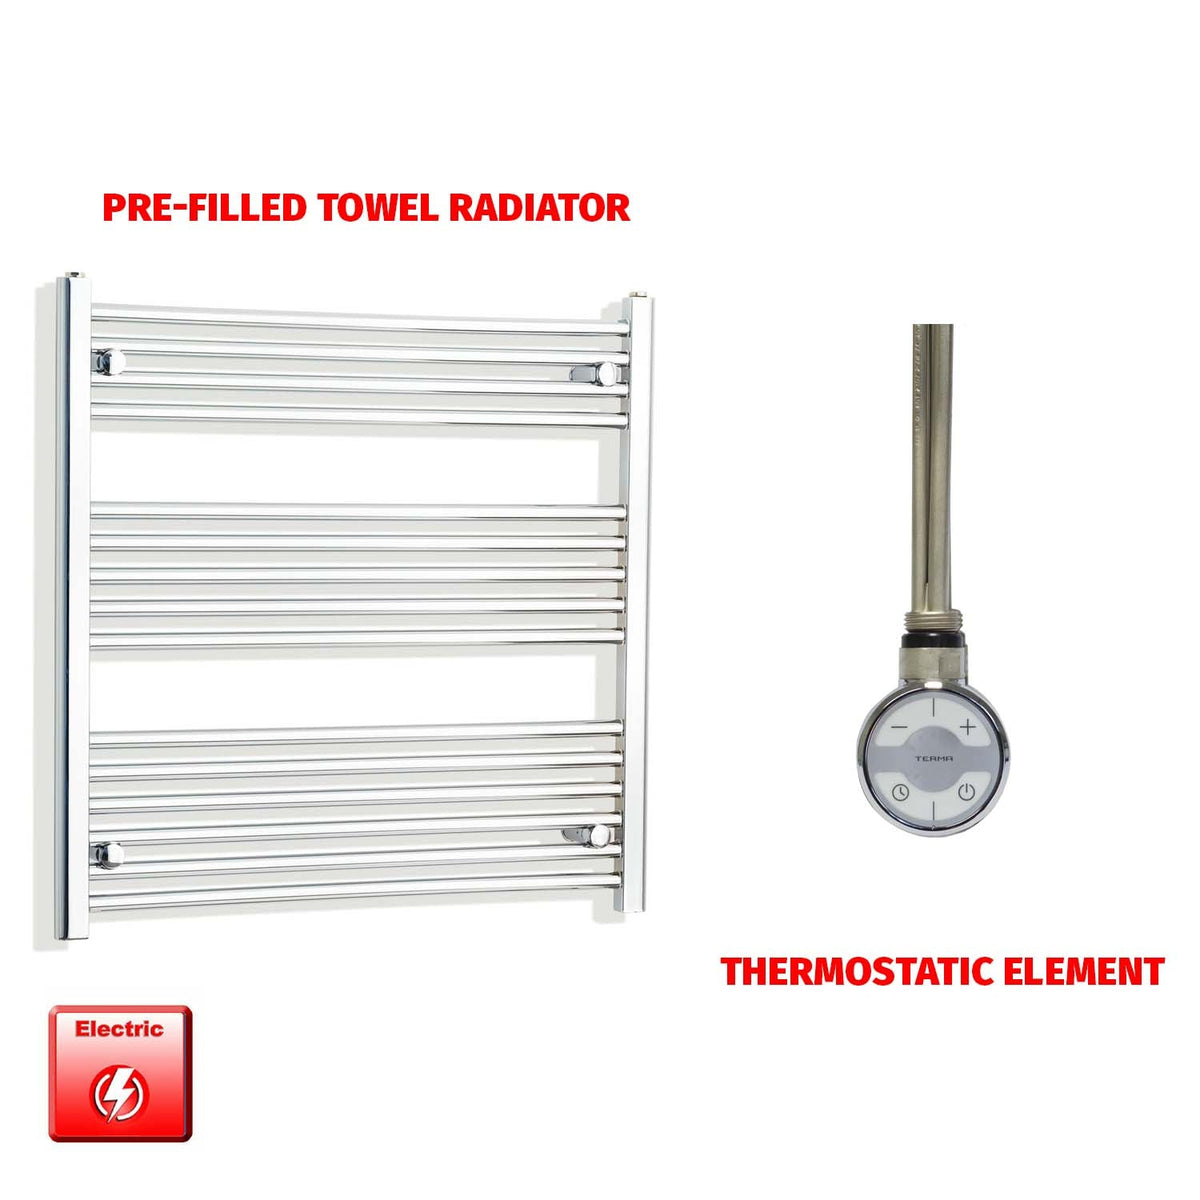 800 x 750 Pre-Filled Electric Heated Towel Radiator Curved or Straight Chrome MOA Thermostatic element no timer